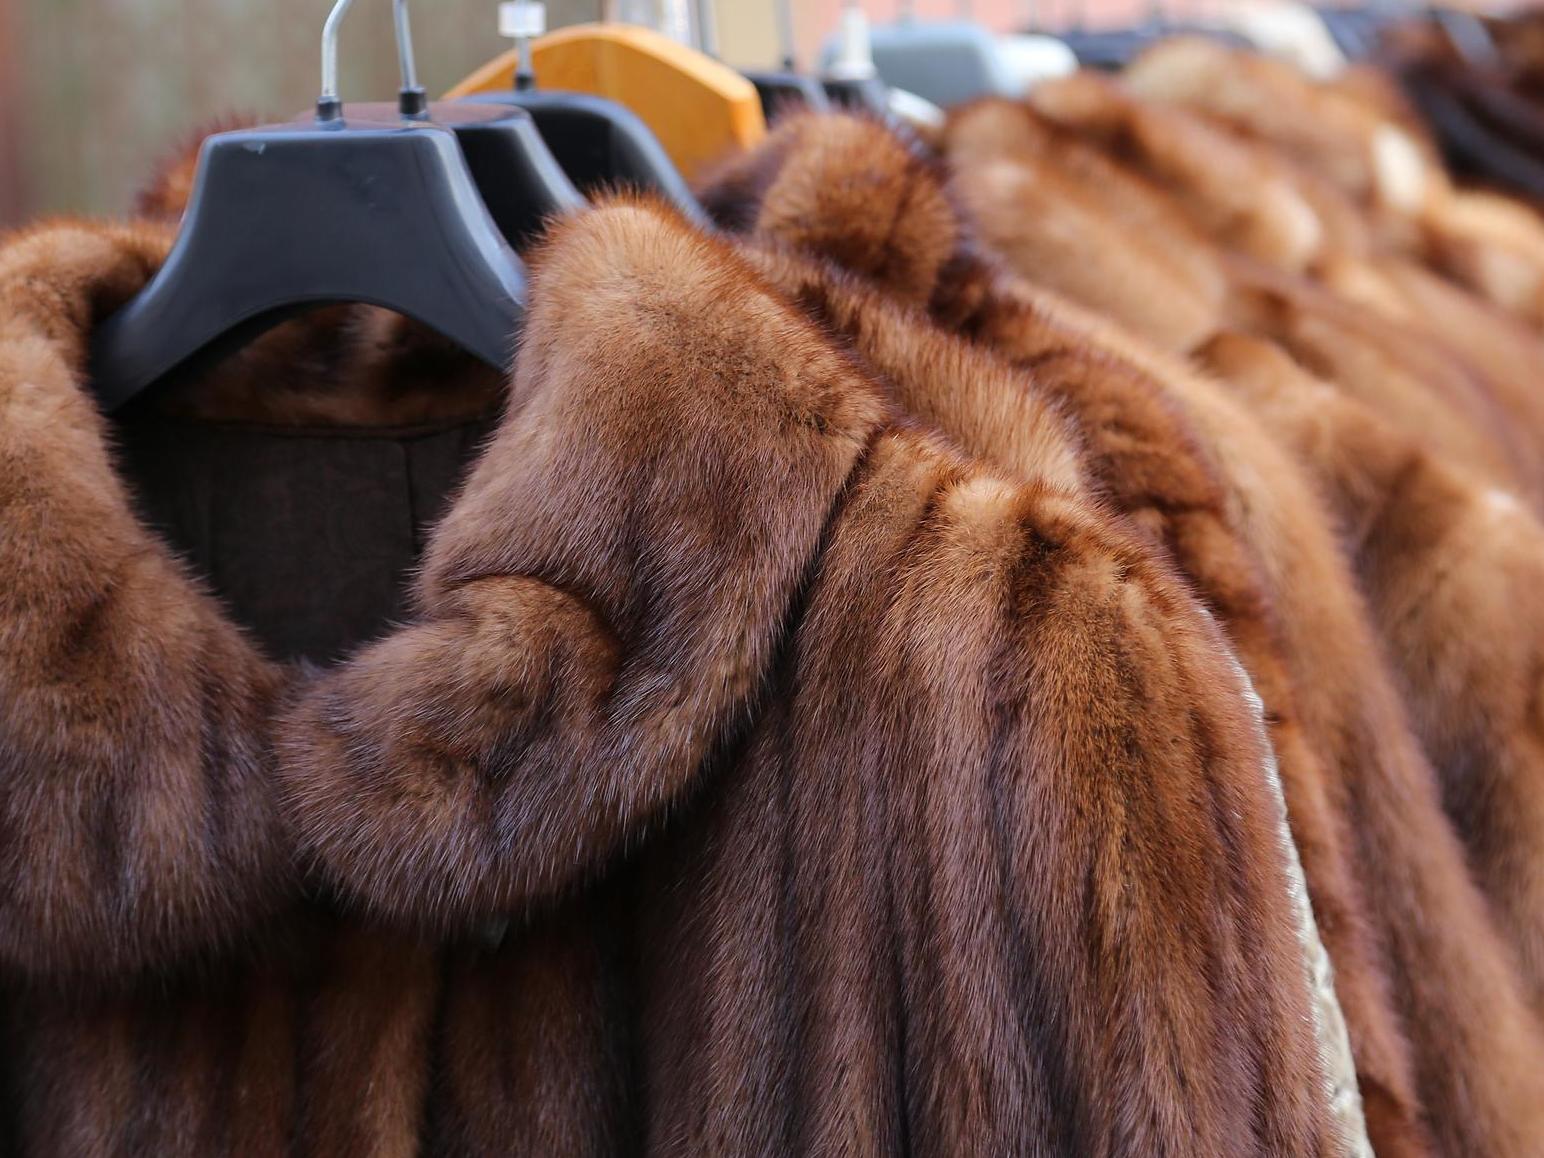 House of Fraser first banned all fur more than 10 years ago and reaffirmed its commitment to being fur-free as recently as 2018